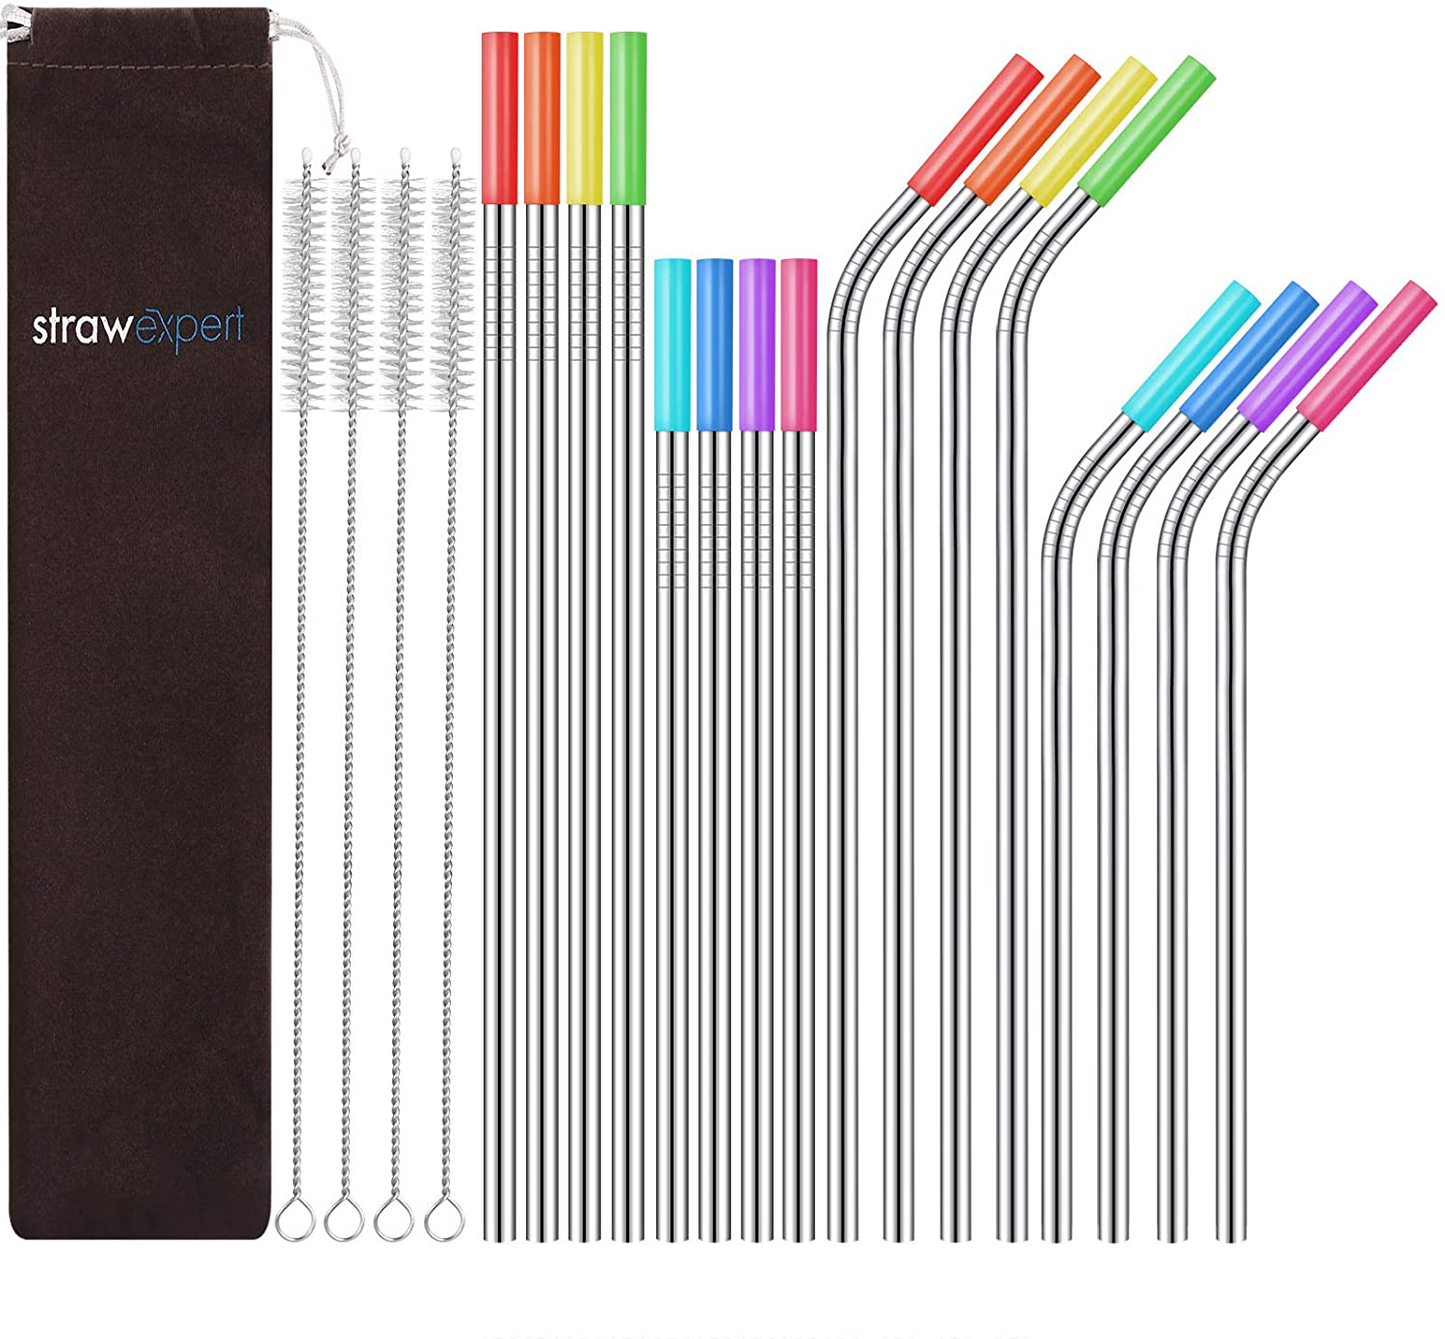 Reusable Metal Straws with Silicone Tip & Travel Case & Cleaning Brush,Long Stainless Steel Straws Drinking Straw for 20 and 30 oz Tumbler